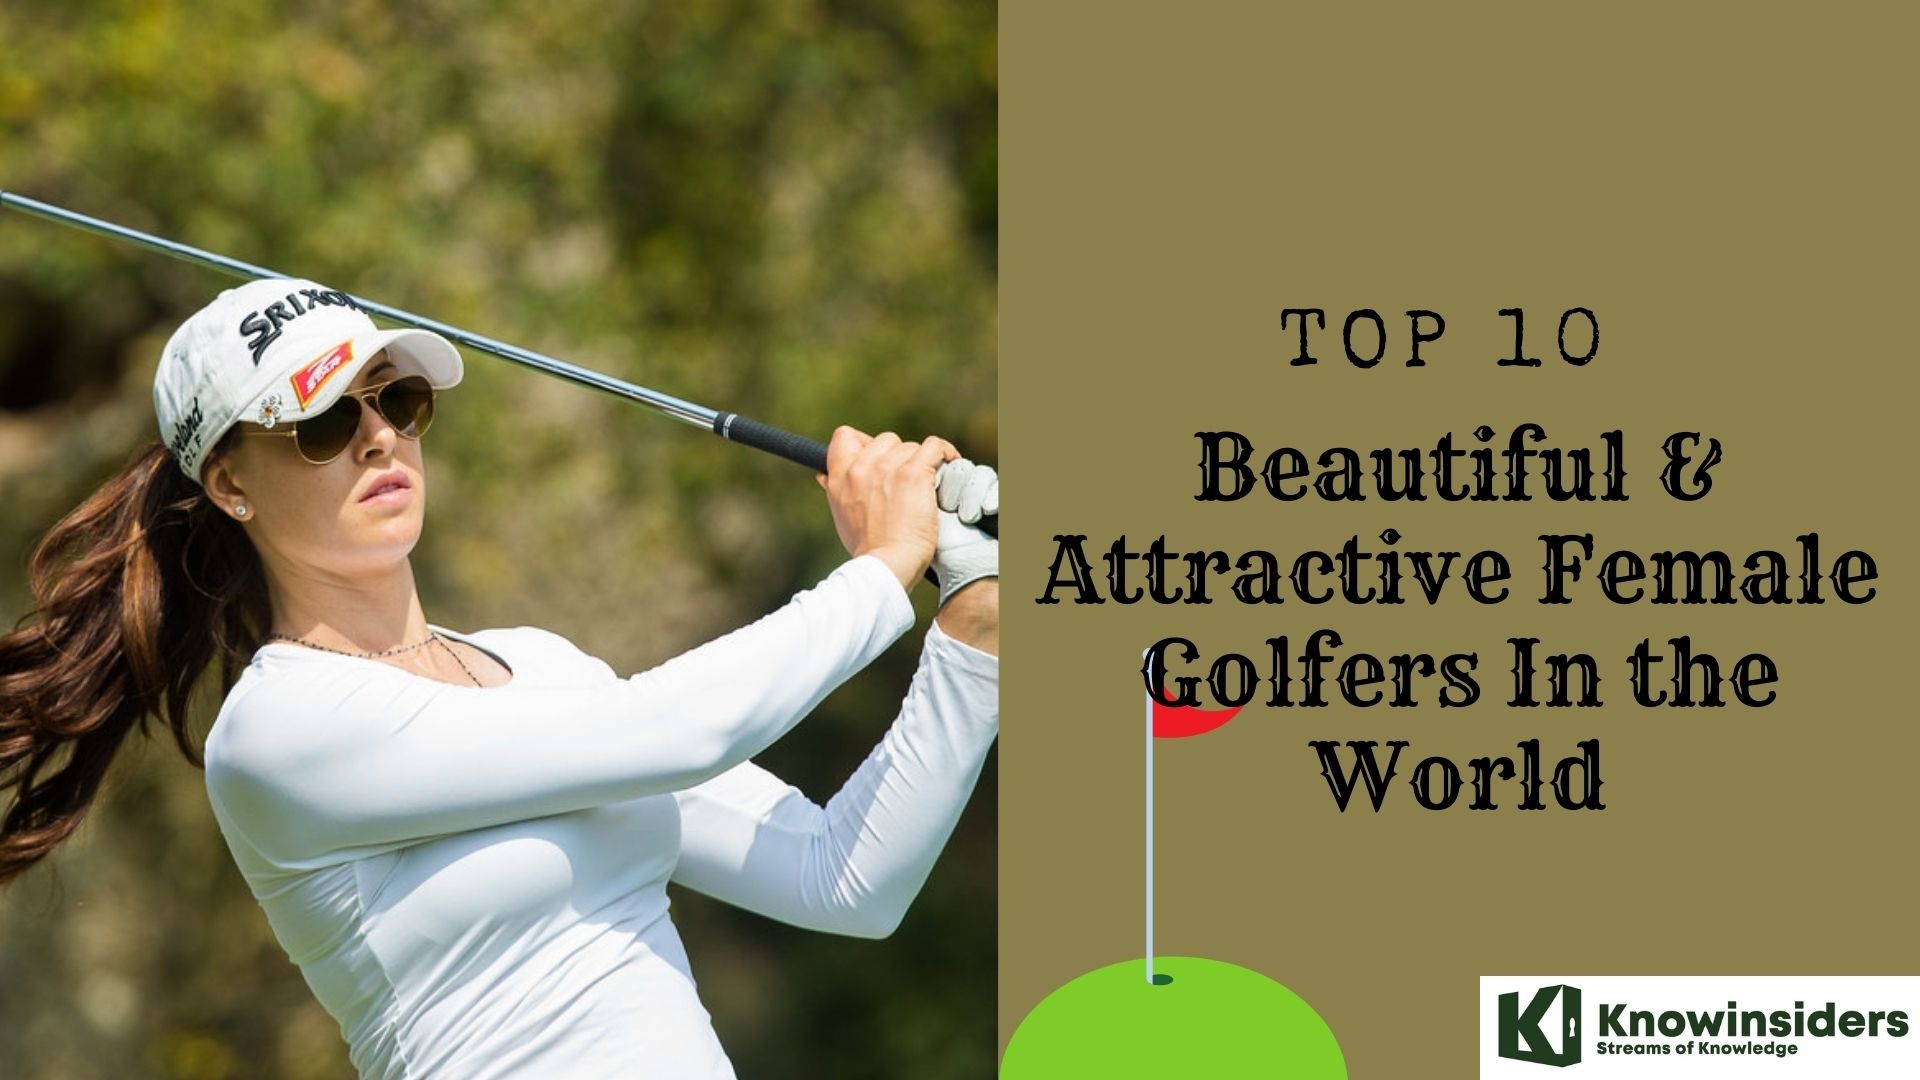 Top 10 Beautiful & Attractive Female Golfers In the World